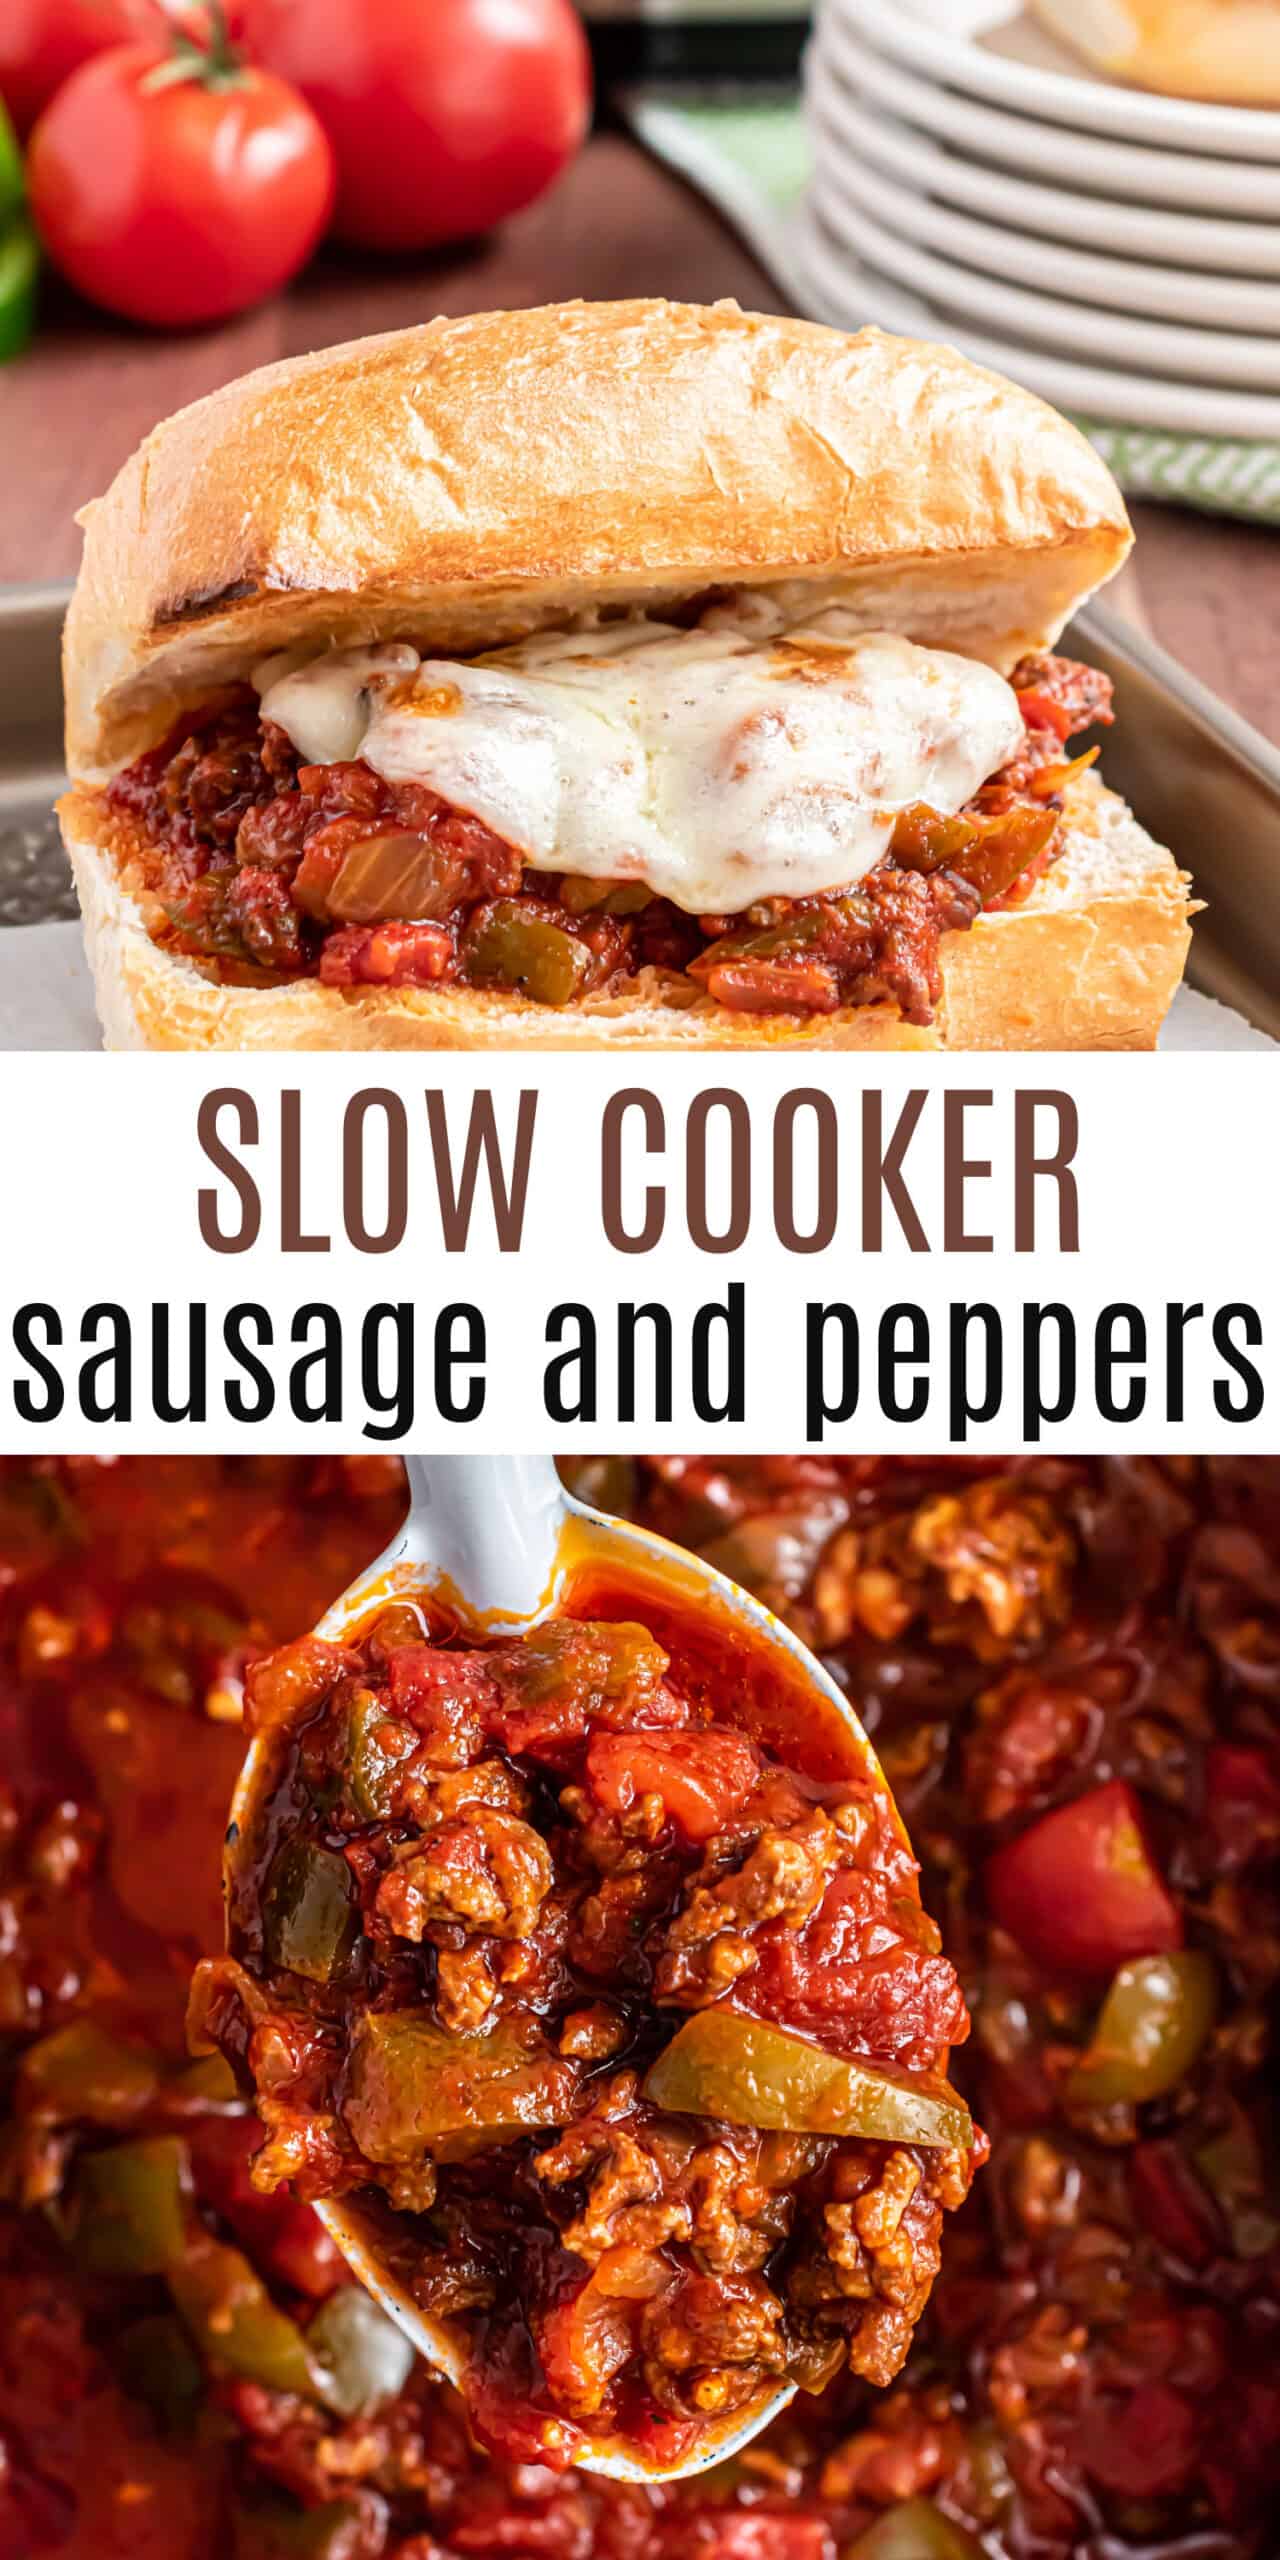 https://www.shugarysweets.com/wp-content/uploads/2013/02/slow-cooker-sausage-peppers-pin-scaled.jpg